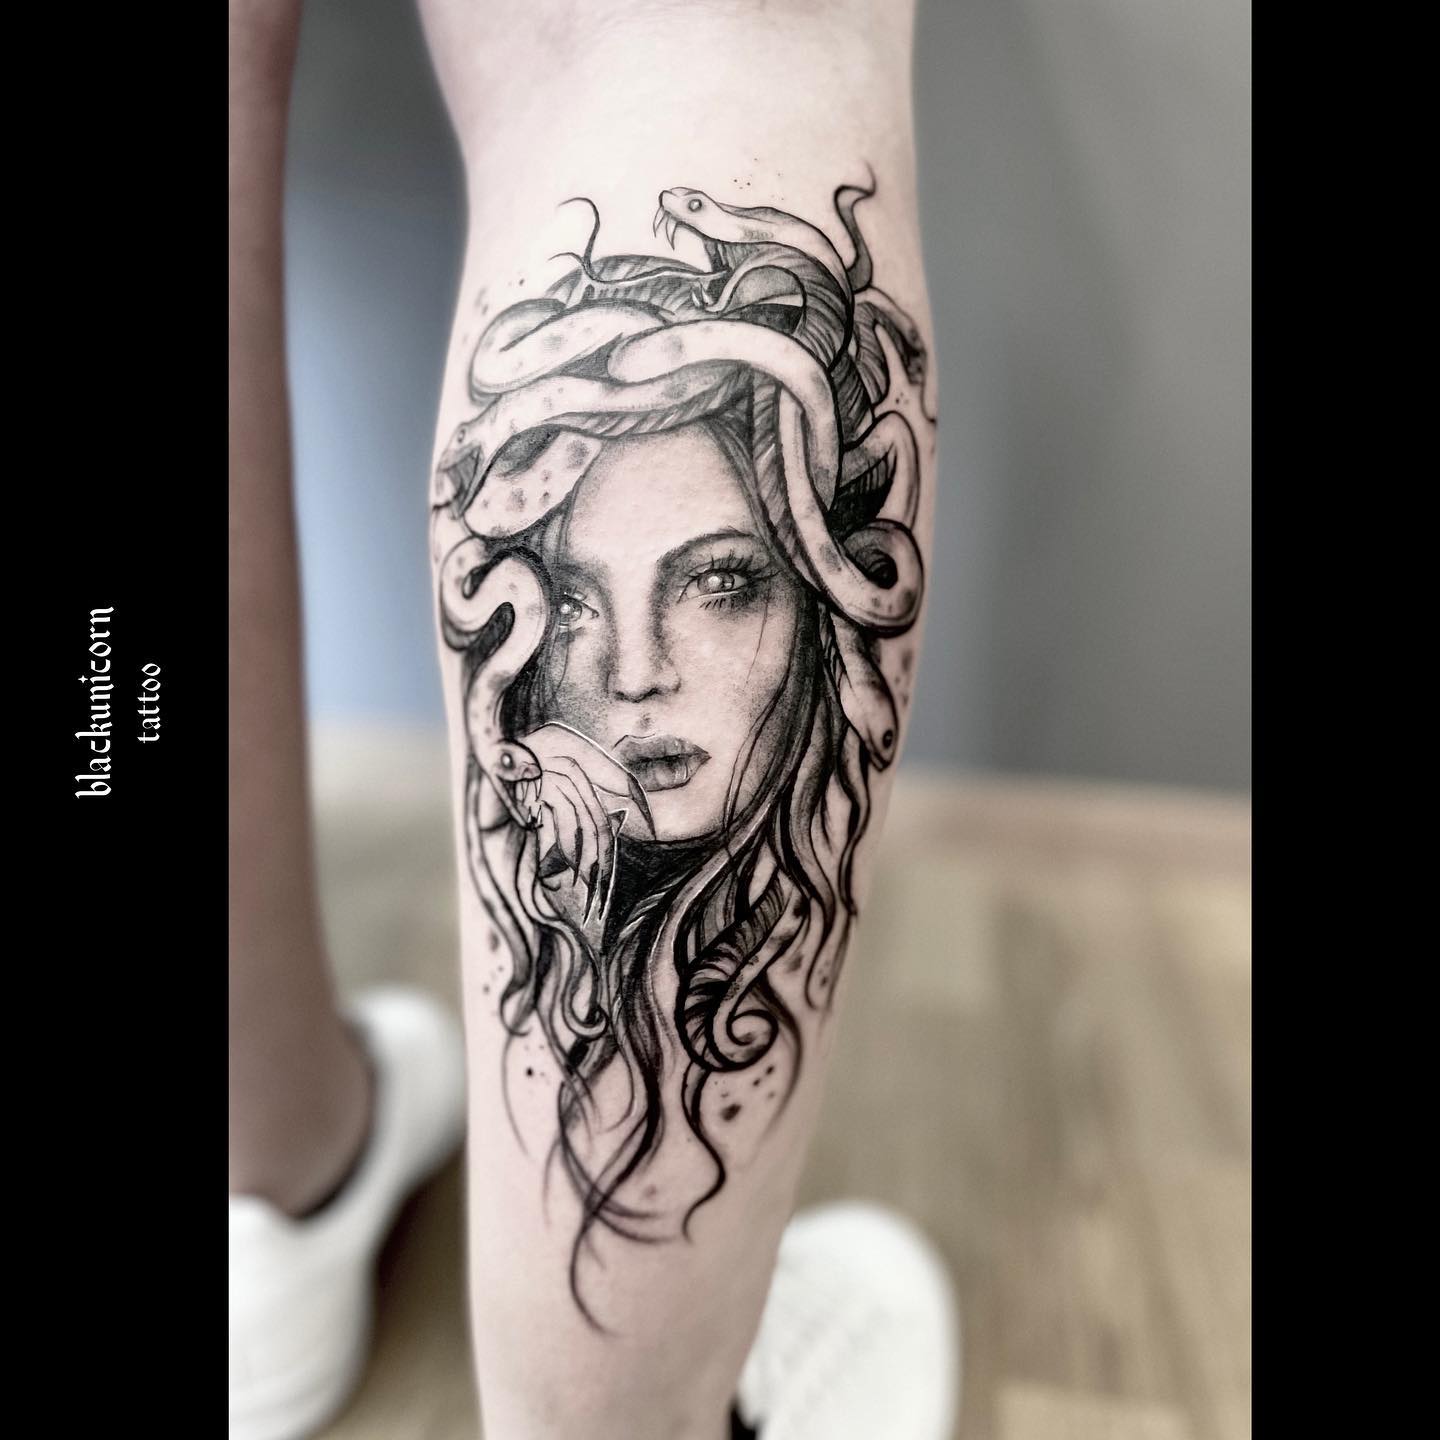 Calves are one of the sexiest parts of the body to get a tattoo! A blackwork Medusa tattoo can make your calves stand out more. With her long nails and bold look, Medusa will give you a different energy.